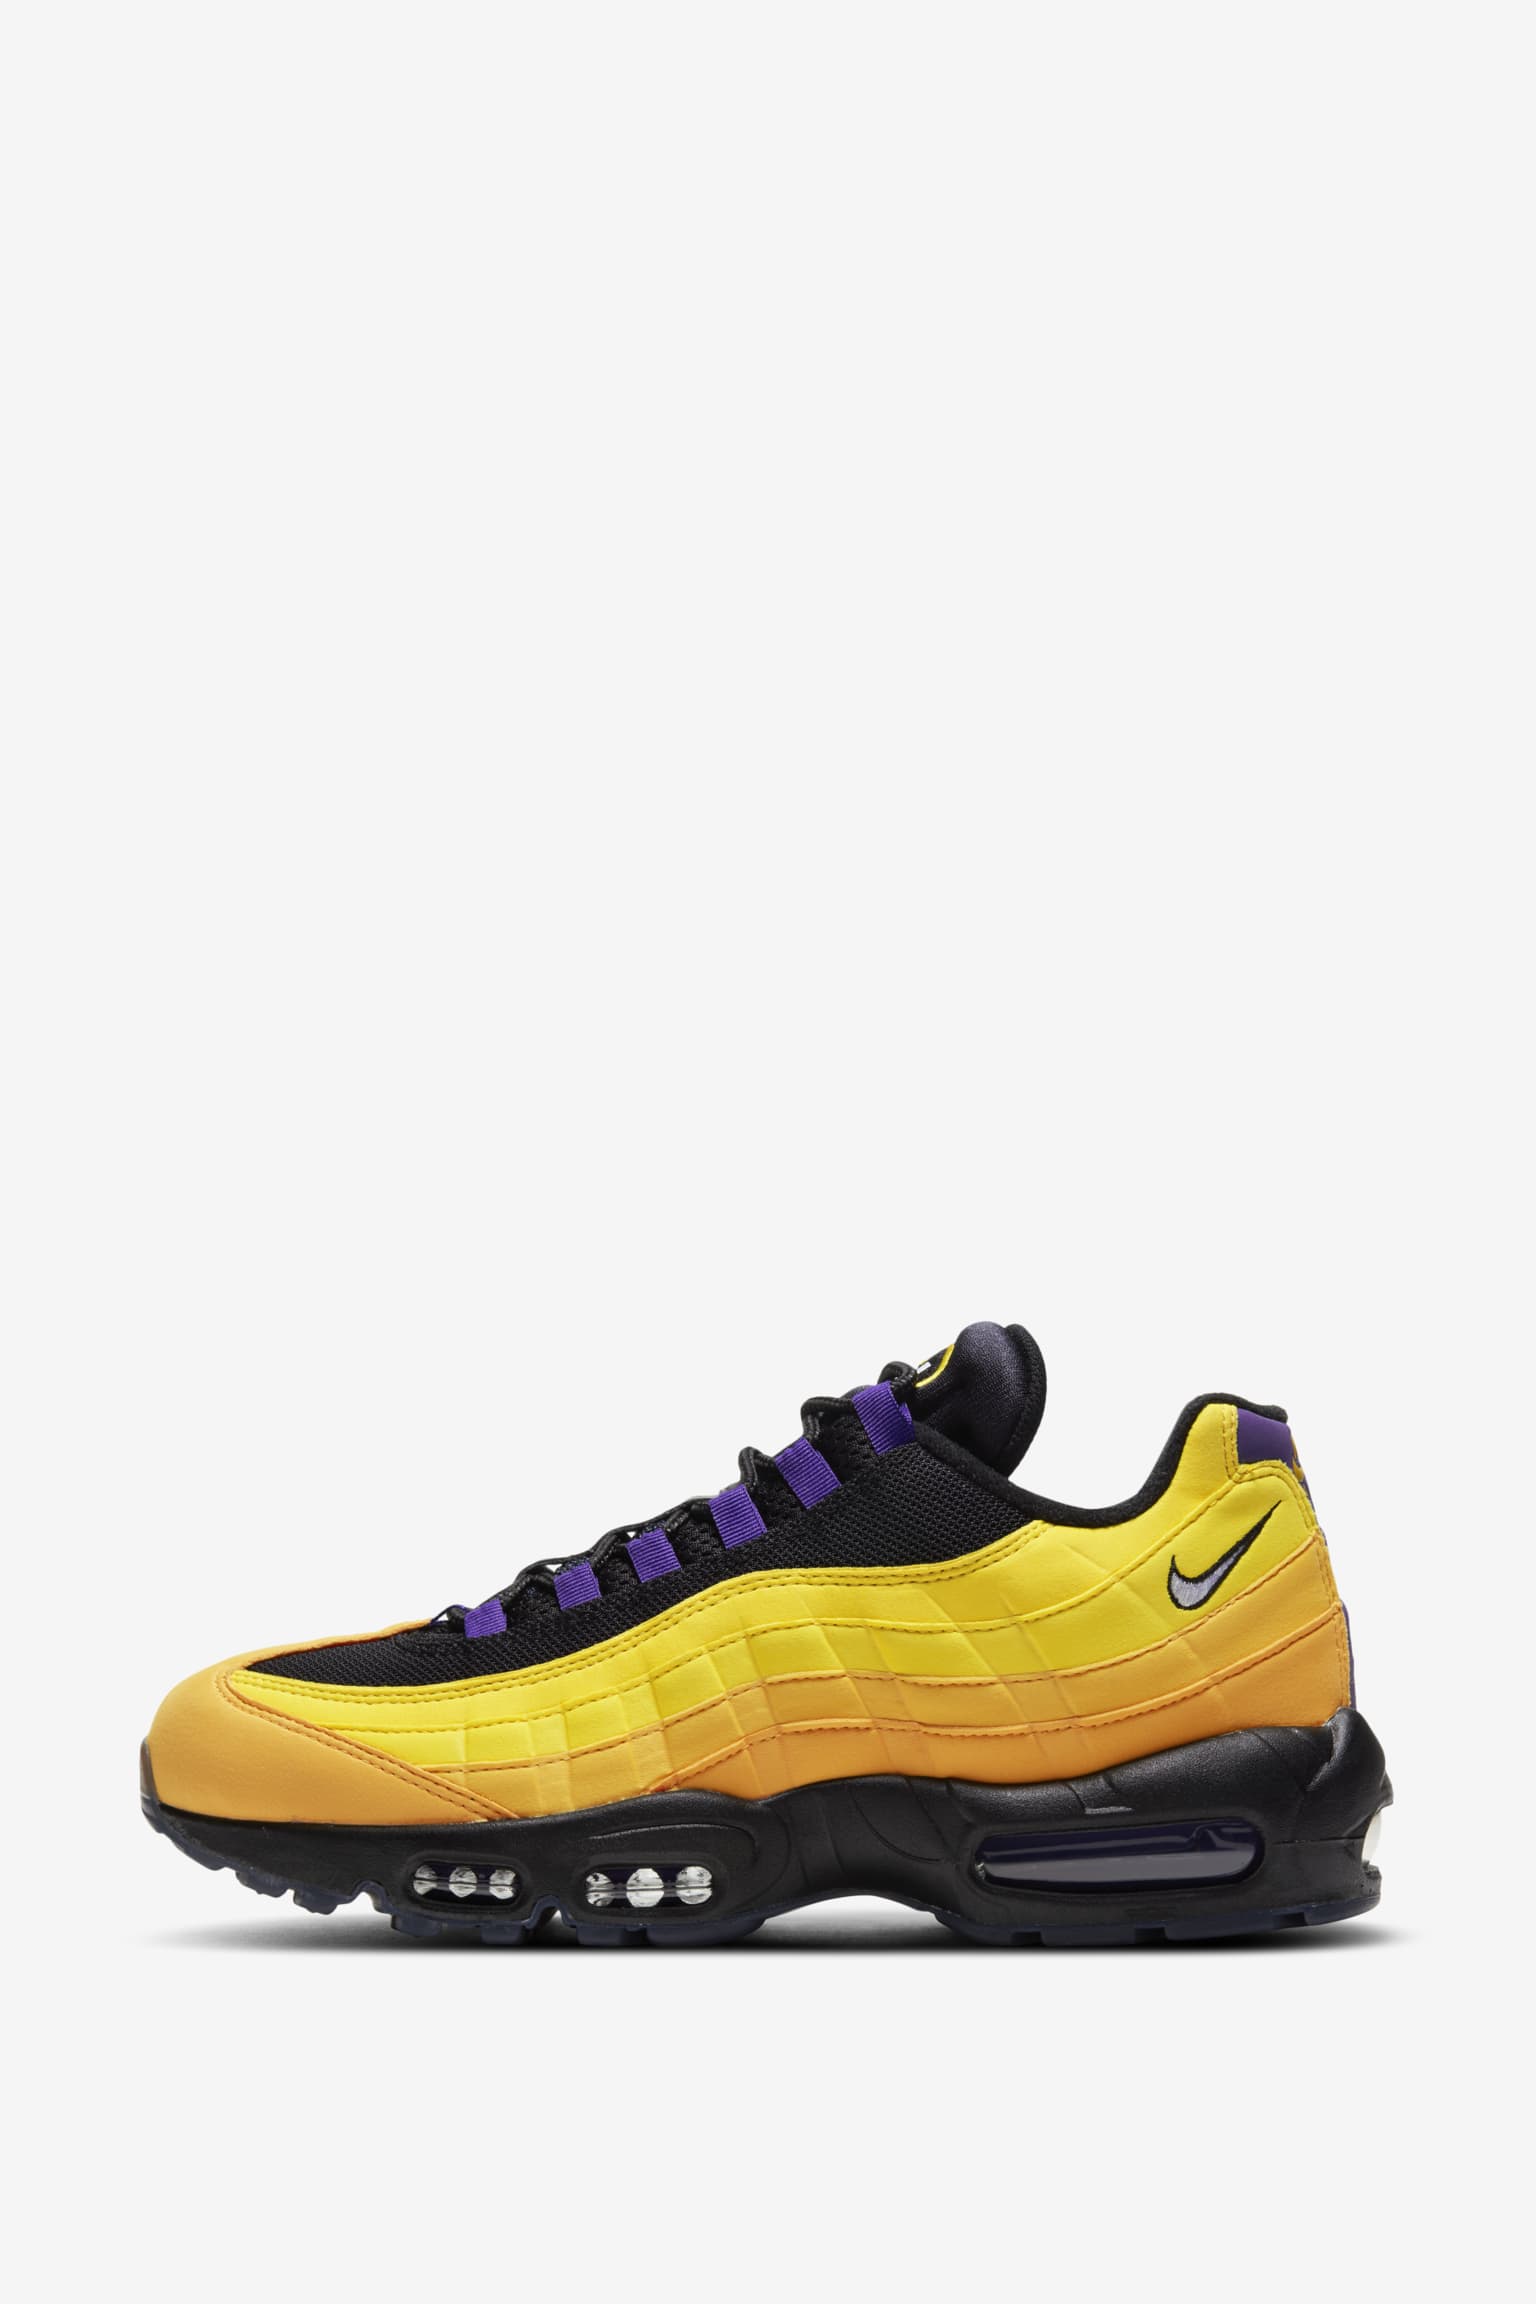 nike air max 95 new release